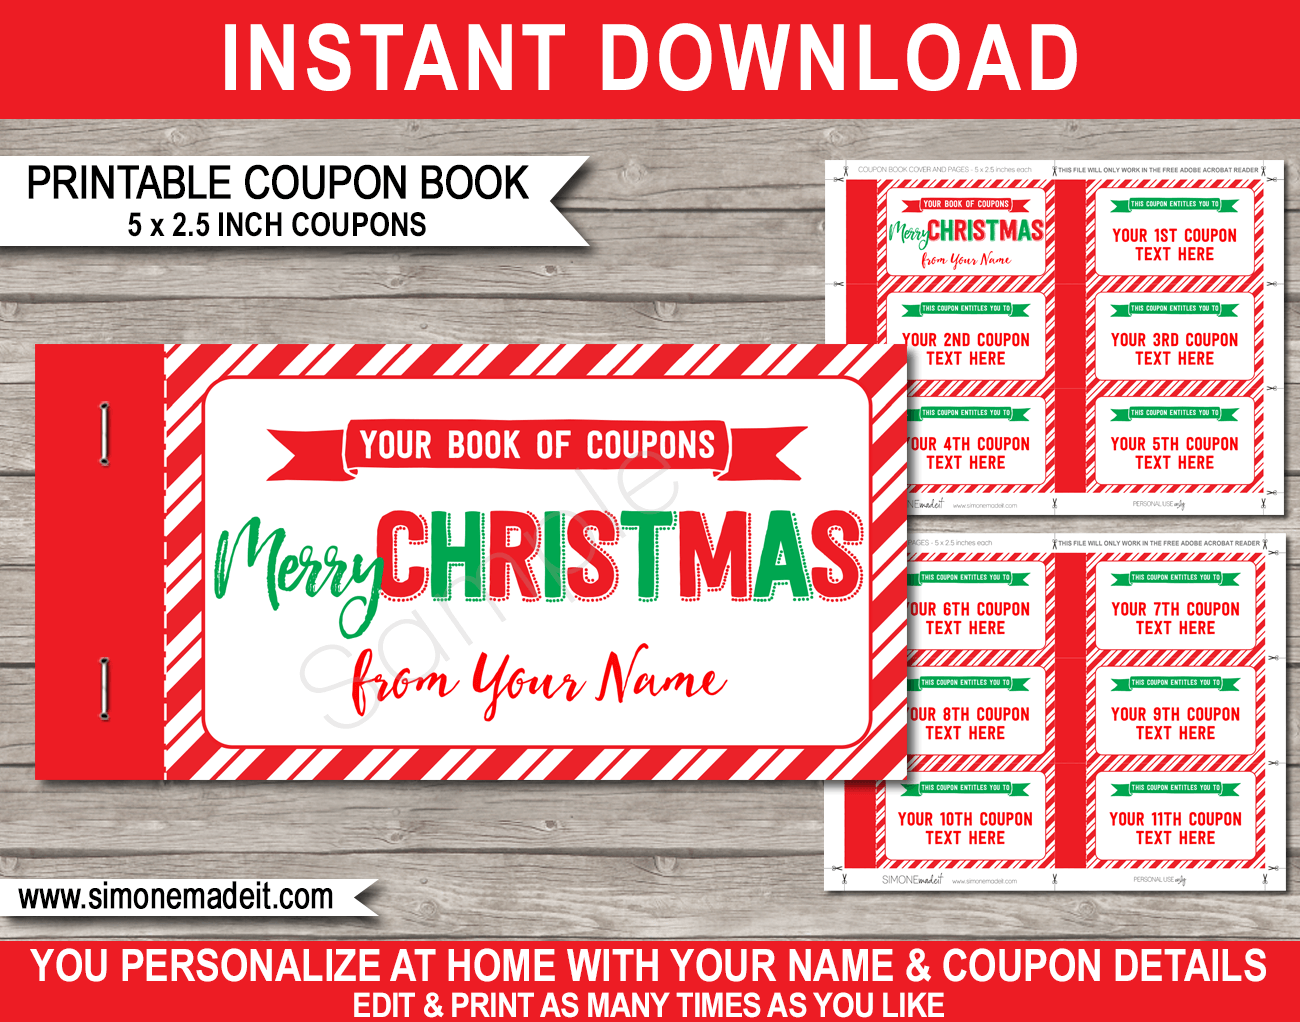 Personalized Coupon Book ic prodesign